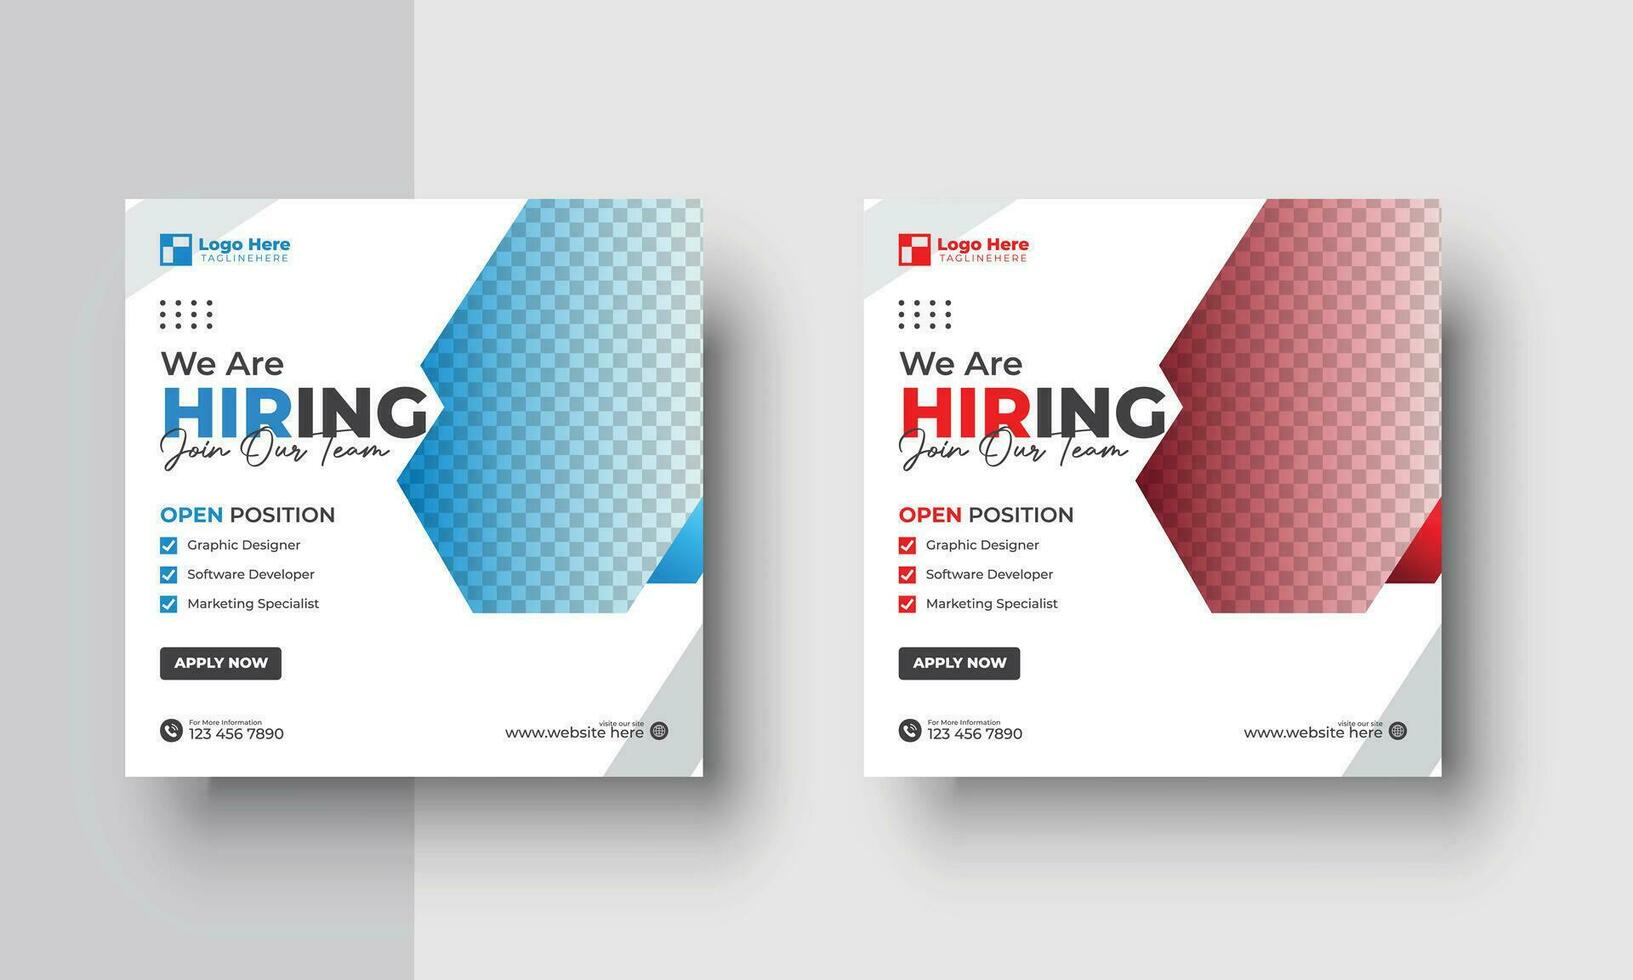 Poster for we are hiring. employees needed. Job recruitment design for companies or agency. good template for advertising on social media vector